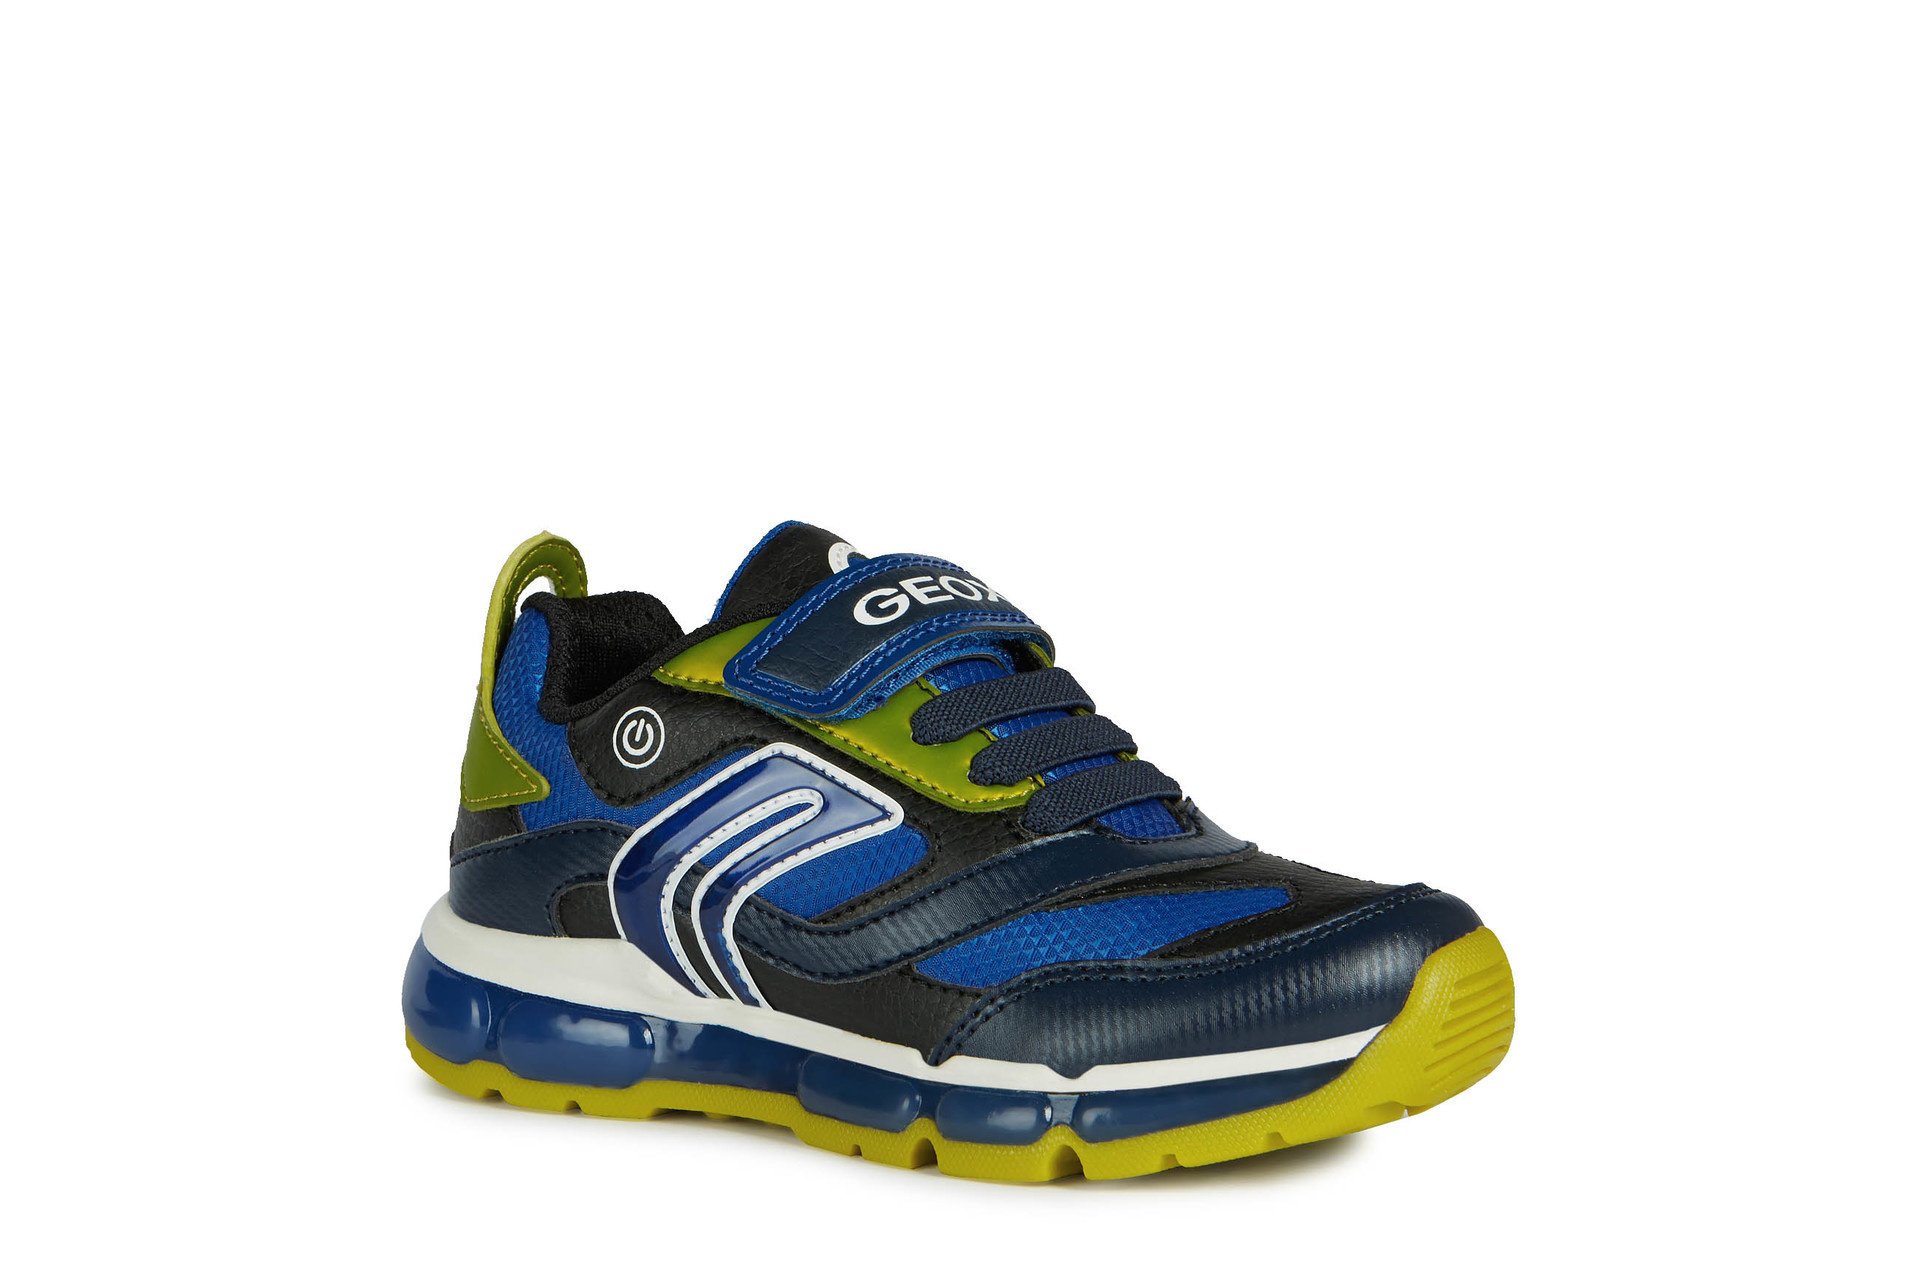 Geox Android Navy Lime